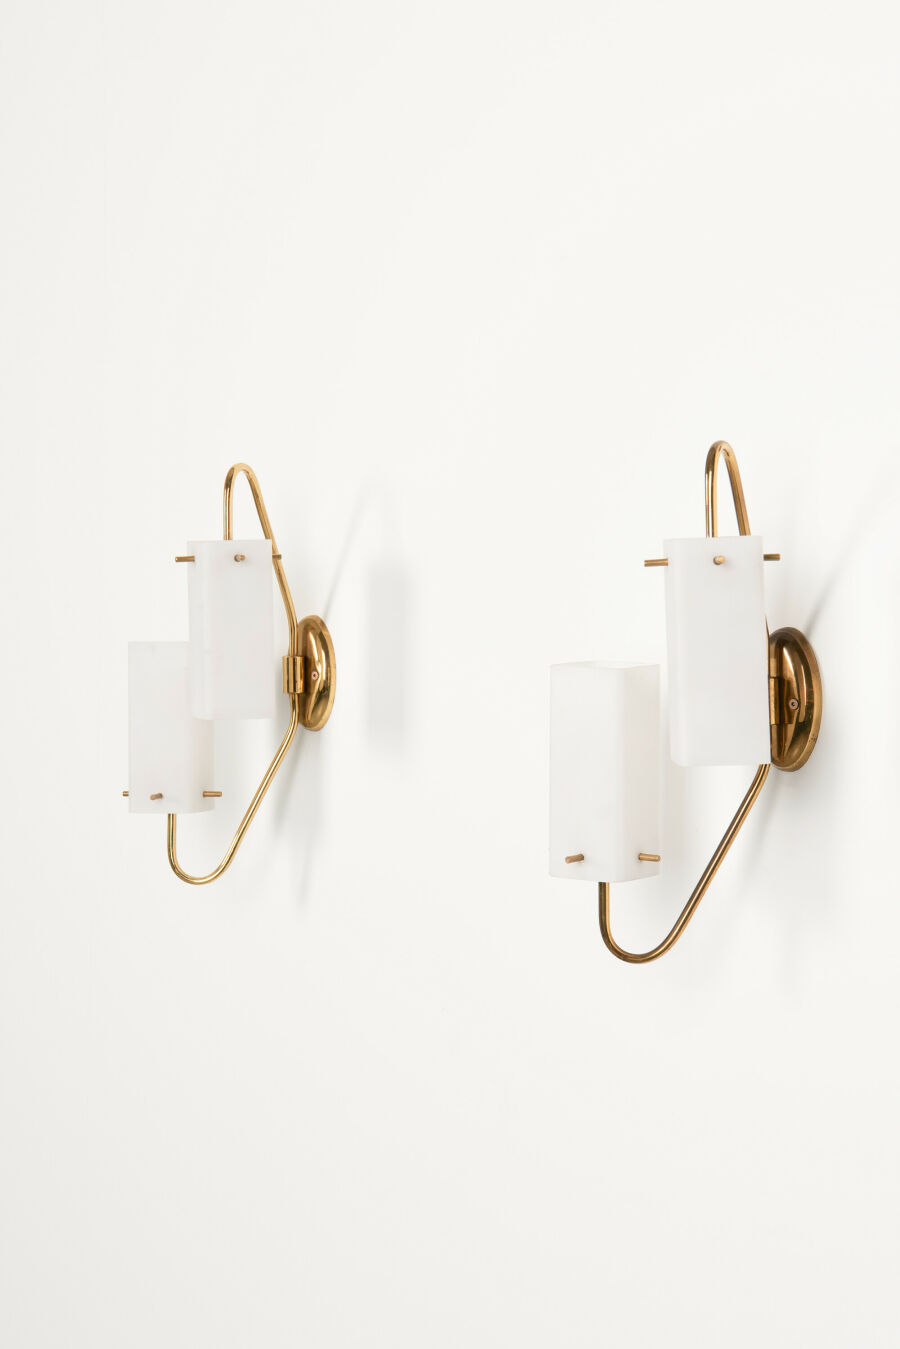 pair-italian-wall-lamp-in-brass-and-square-glass4